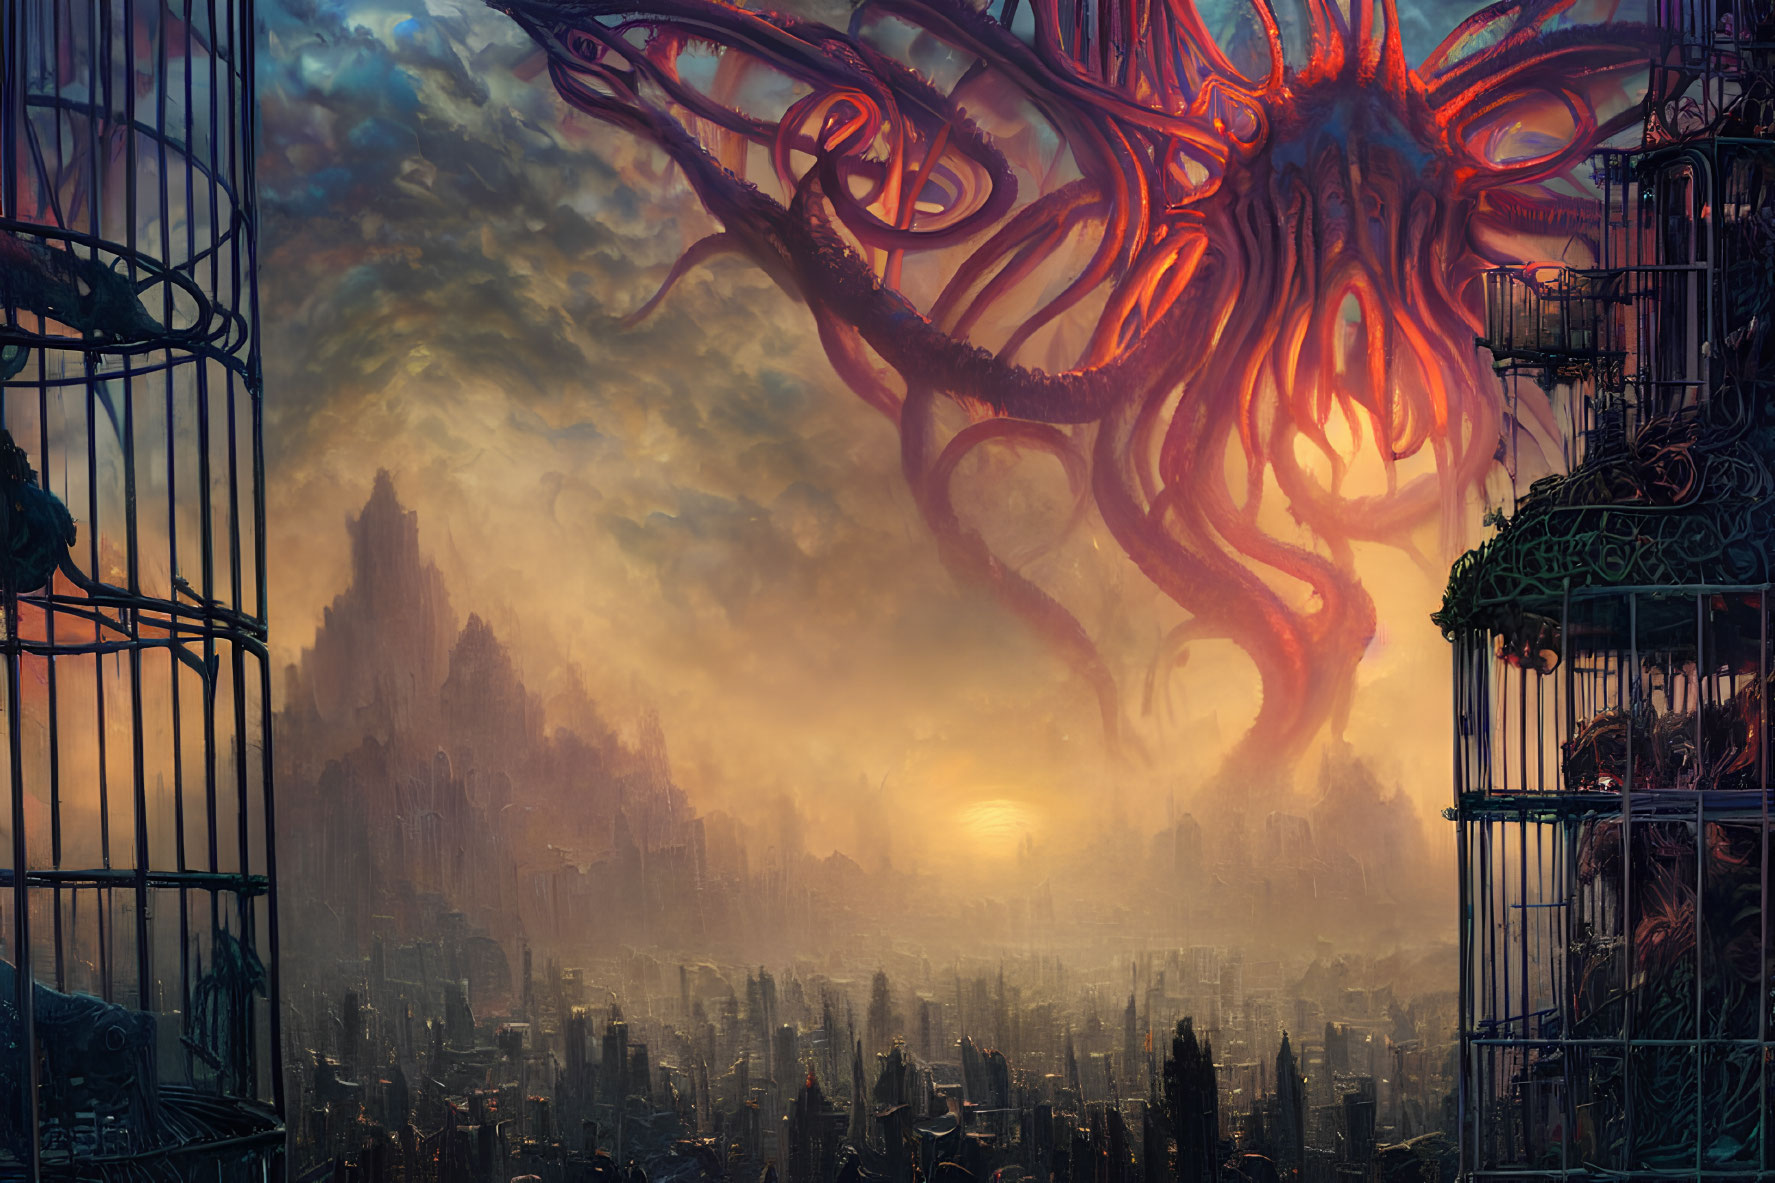 Surreal cityscape with giant octopus and dramatic sky